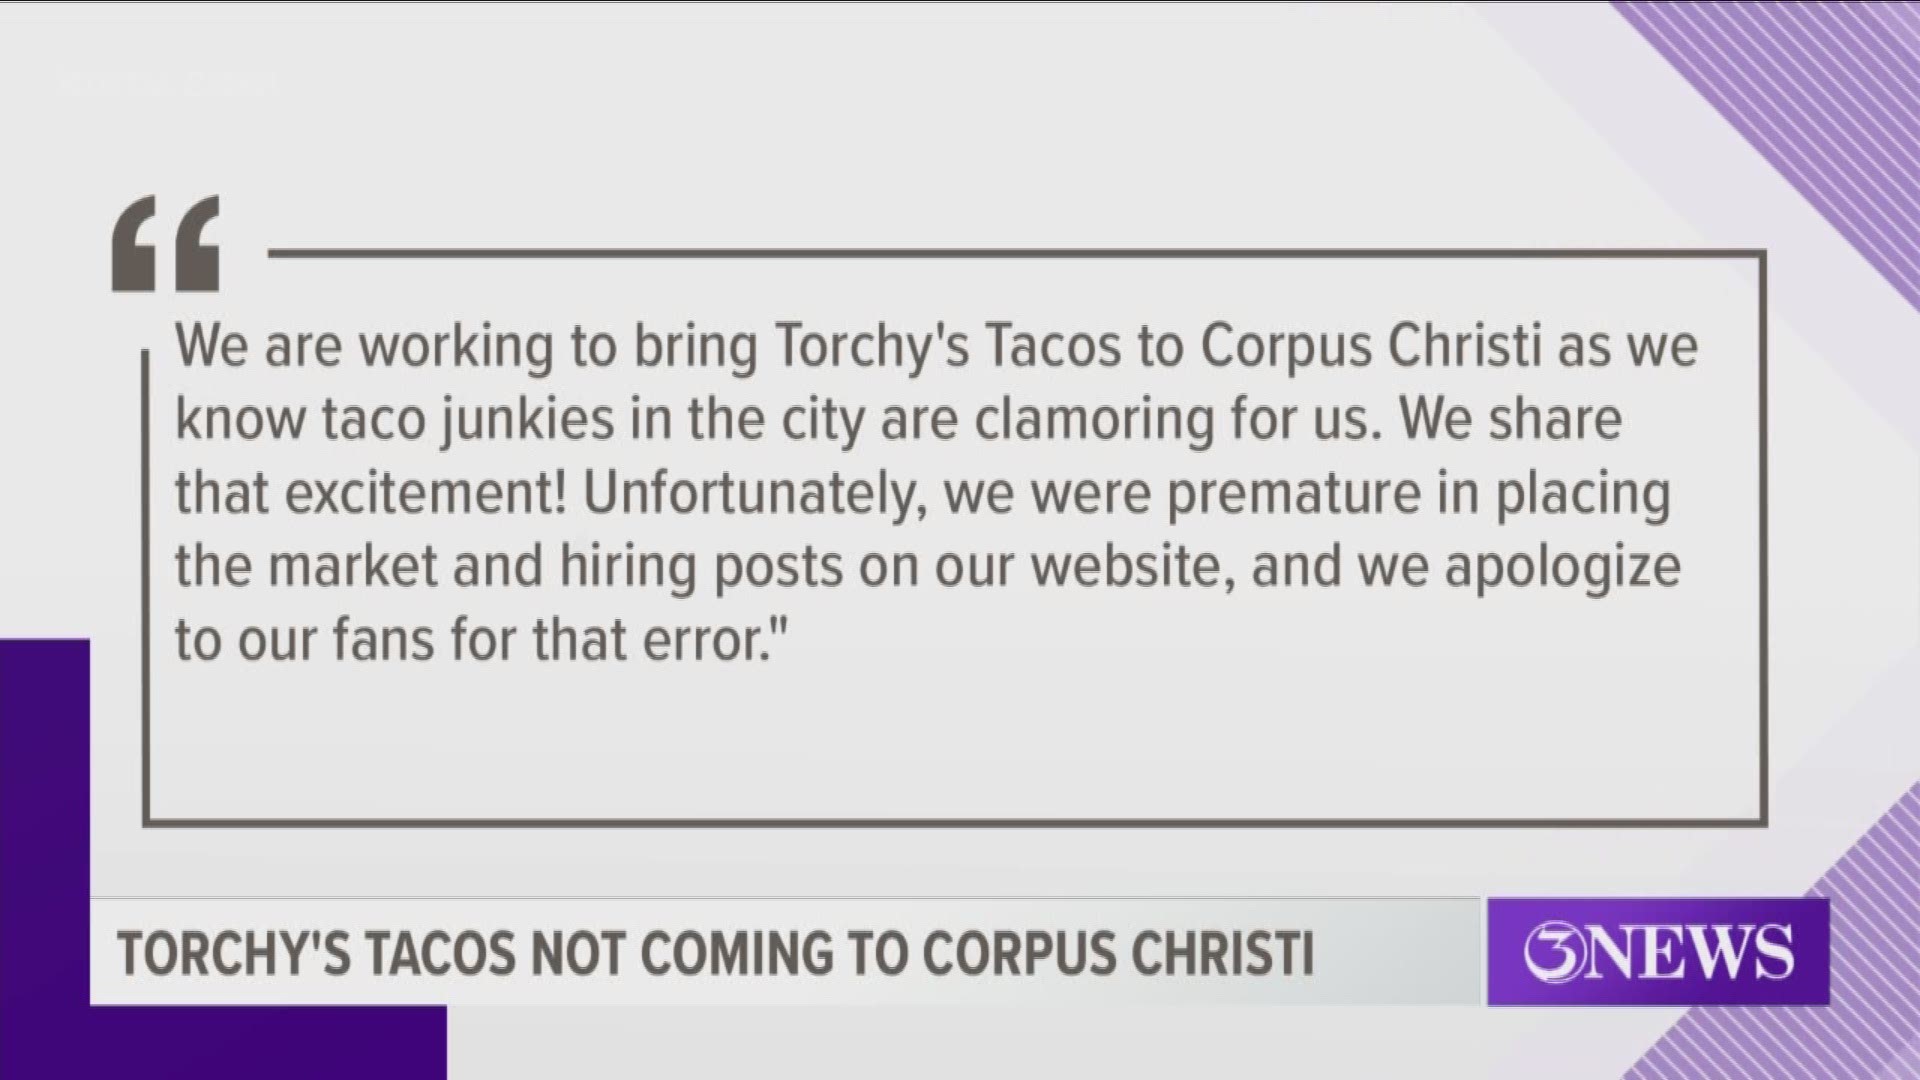 Torchy's Tacos is a taco company that started in Austin as a food truck in 2006.